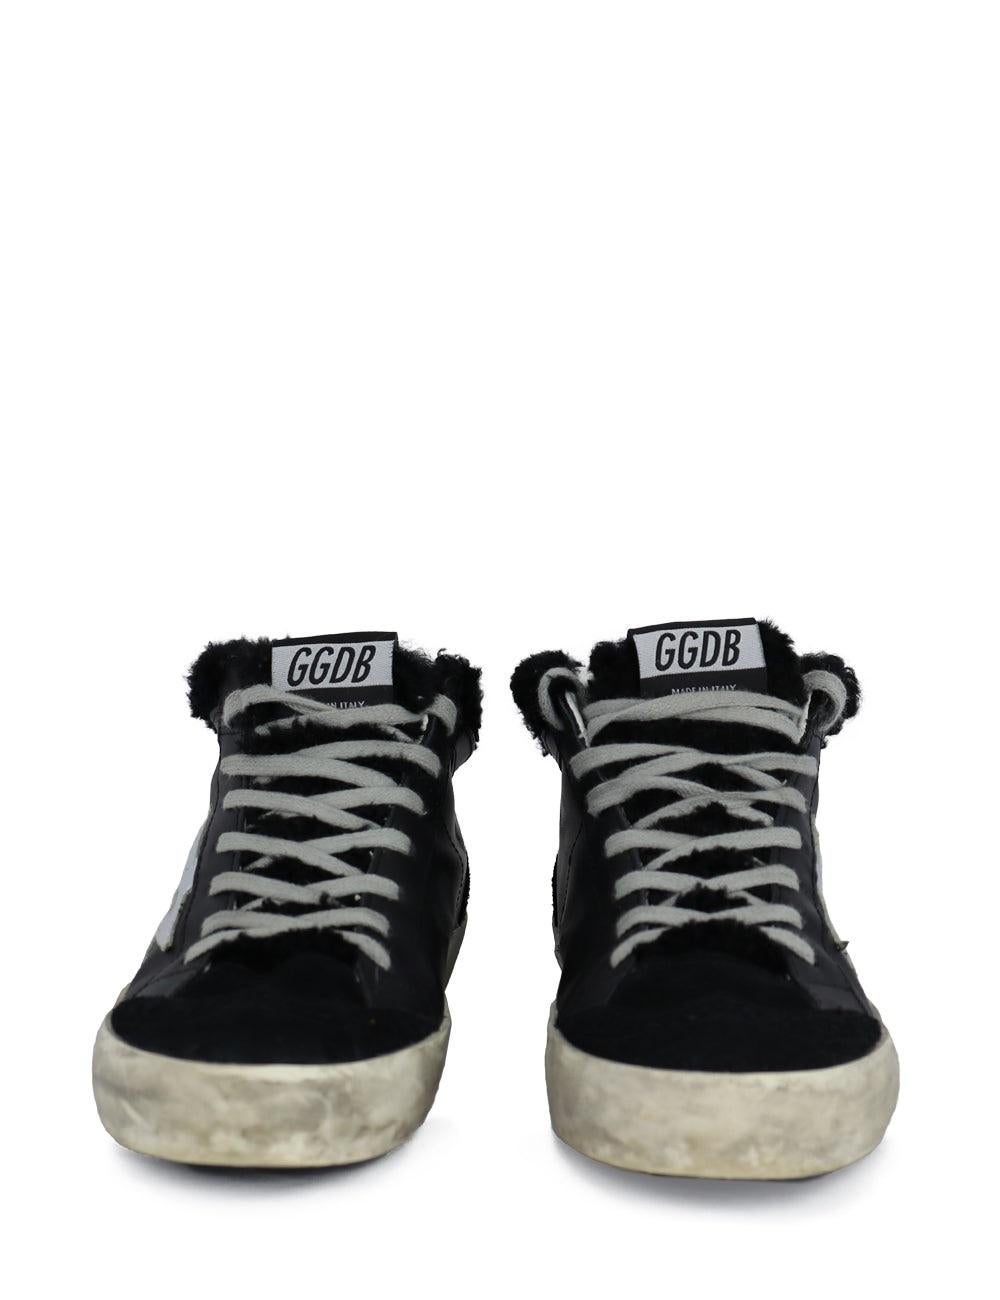 Golden Goose Mid Star shearling-lined distressed leather and suede sneakers, with a signature metallic star at the side and the shearling collar.

Additional information:
Material: Suede and Leather
Size: EU 37
Overall Condition: Very Good
Interior